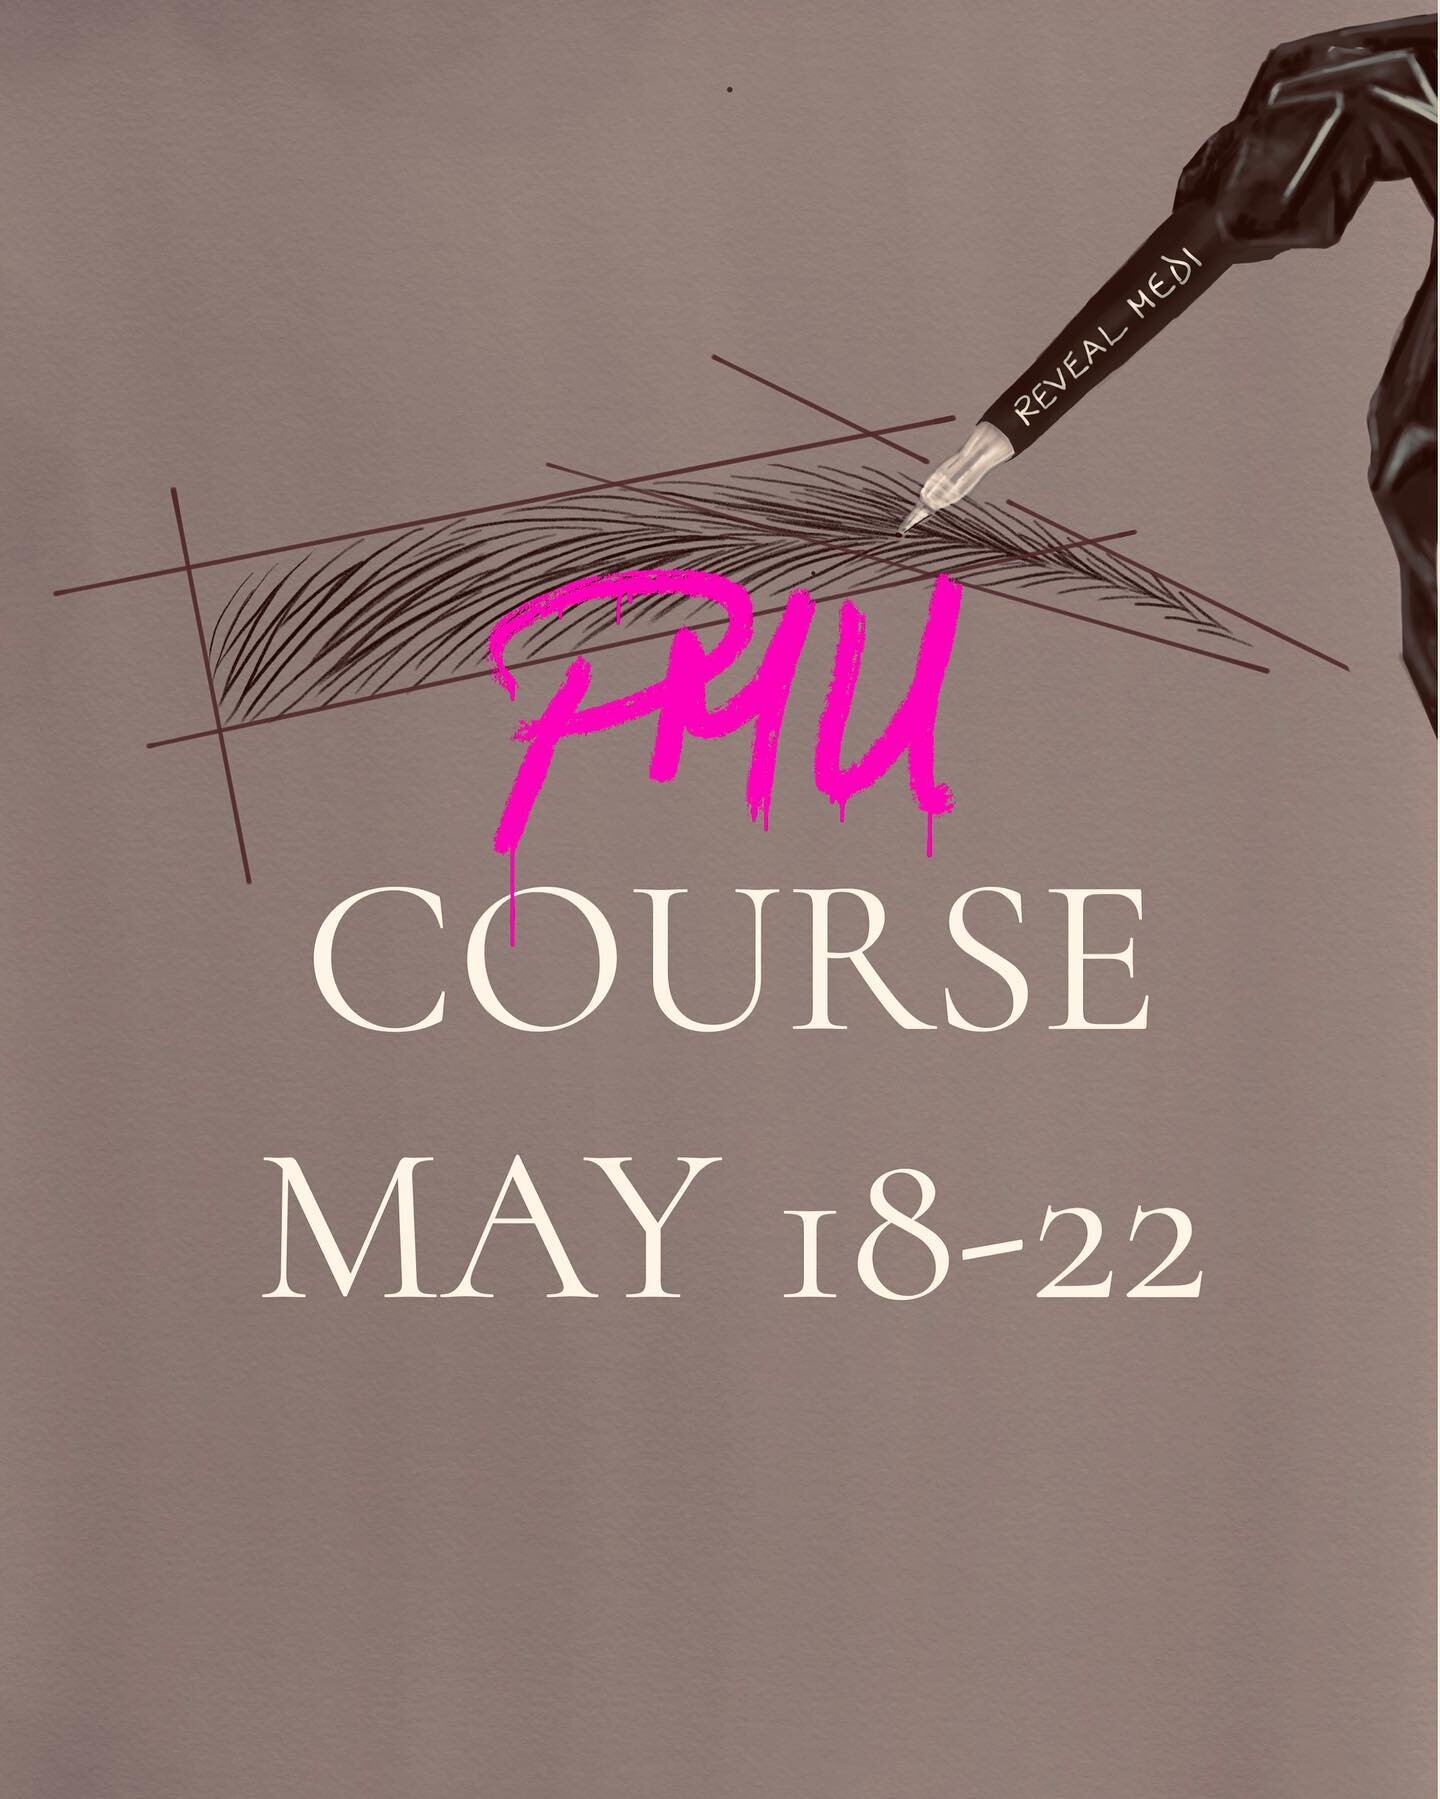 We have a 5 day permanent makeup (PMU) course available from May 18th to 22nd! 🙌🏼 Secure your spot with a $500 deposit. We can&rsquo;t wait to see you in the new academy, located at 2 Kent street in Lindsay!

The full tuition is $5,000 and includes